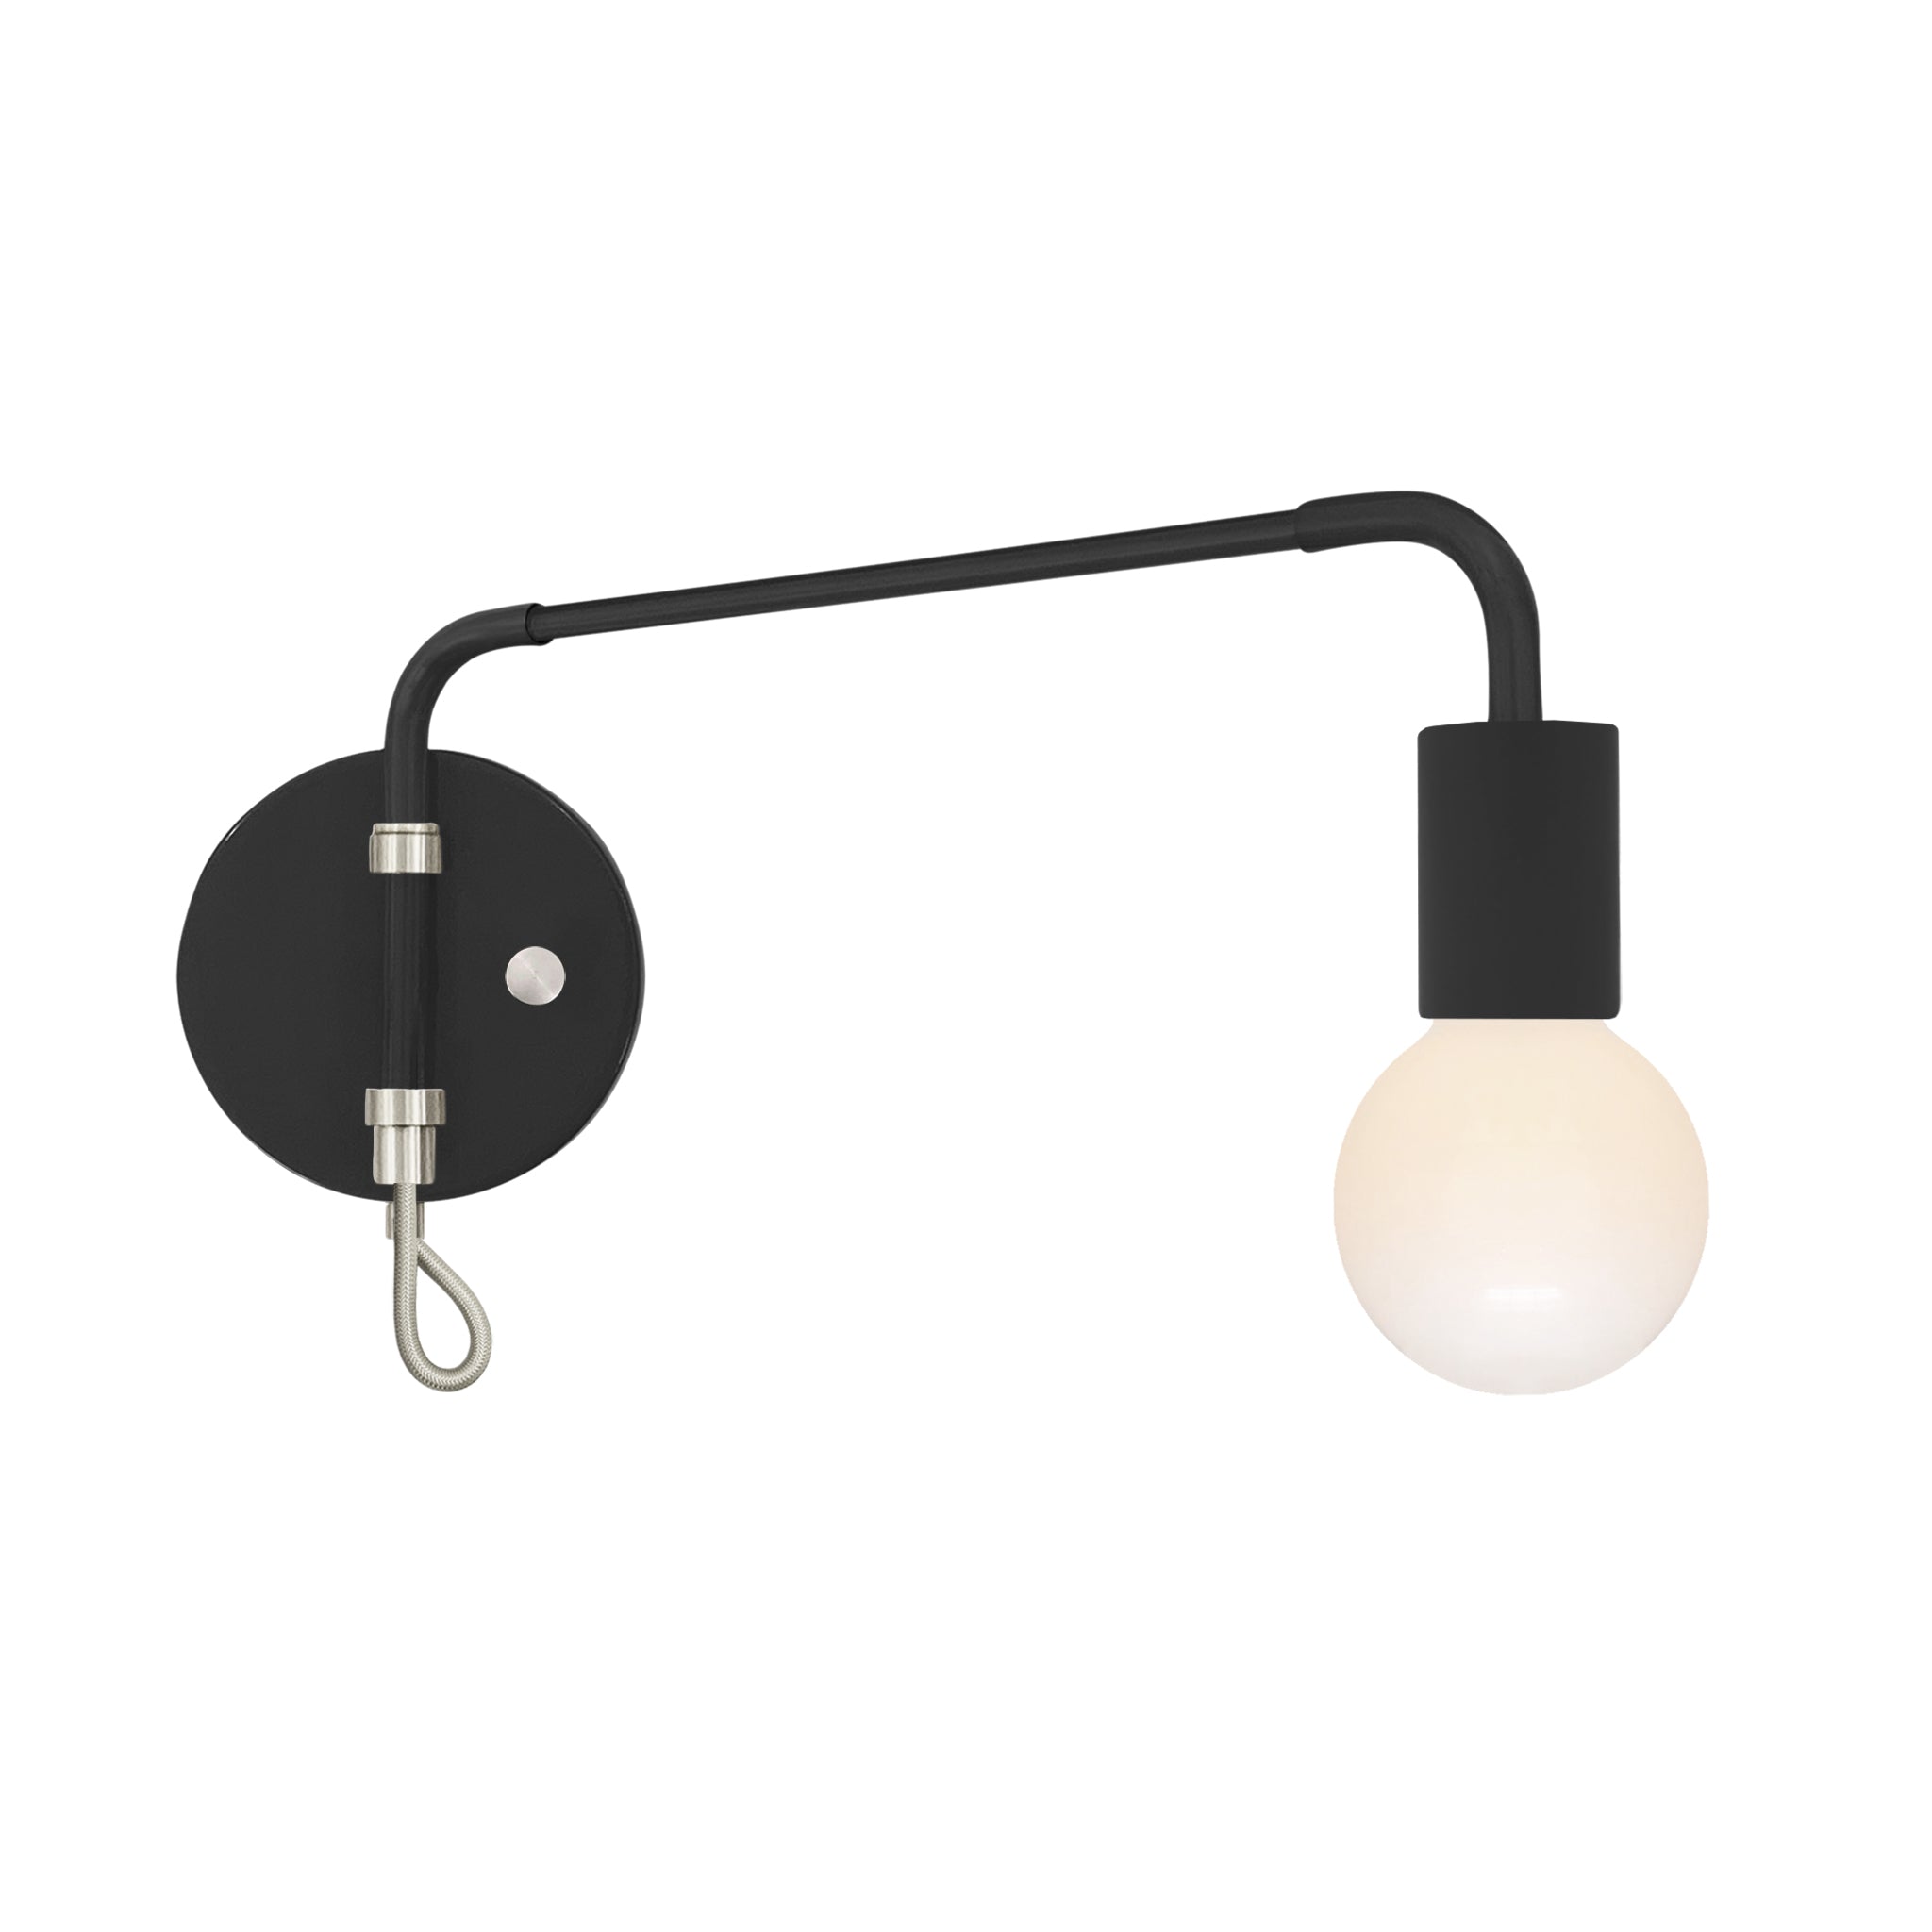 Nickel and black color Sway sconce Dutton Brown lighting